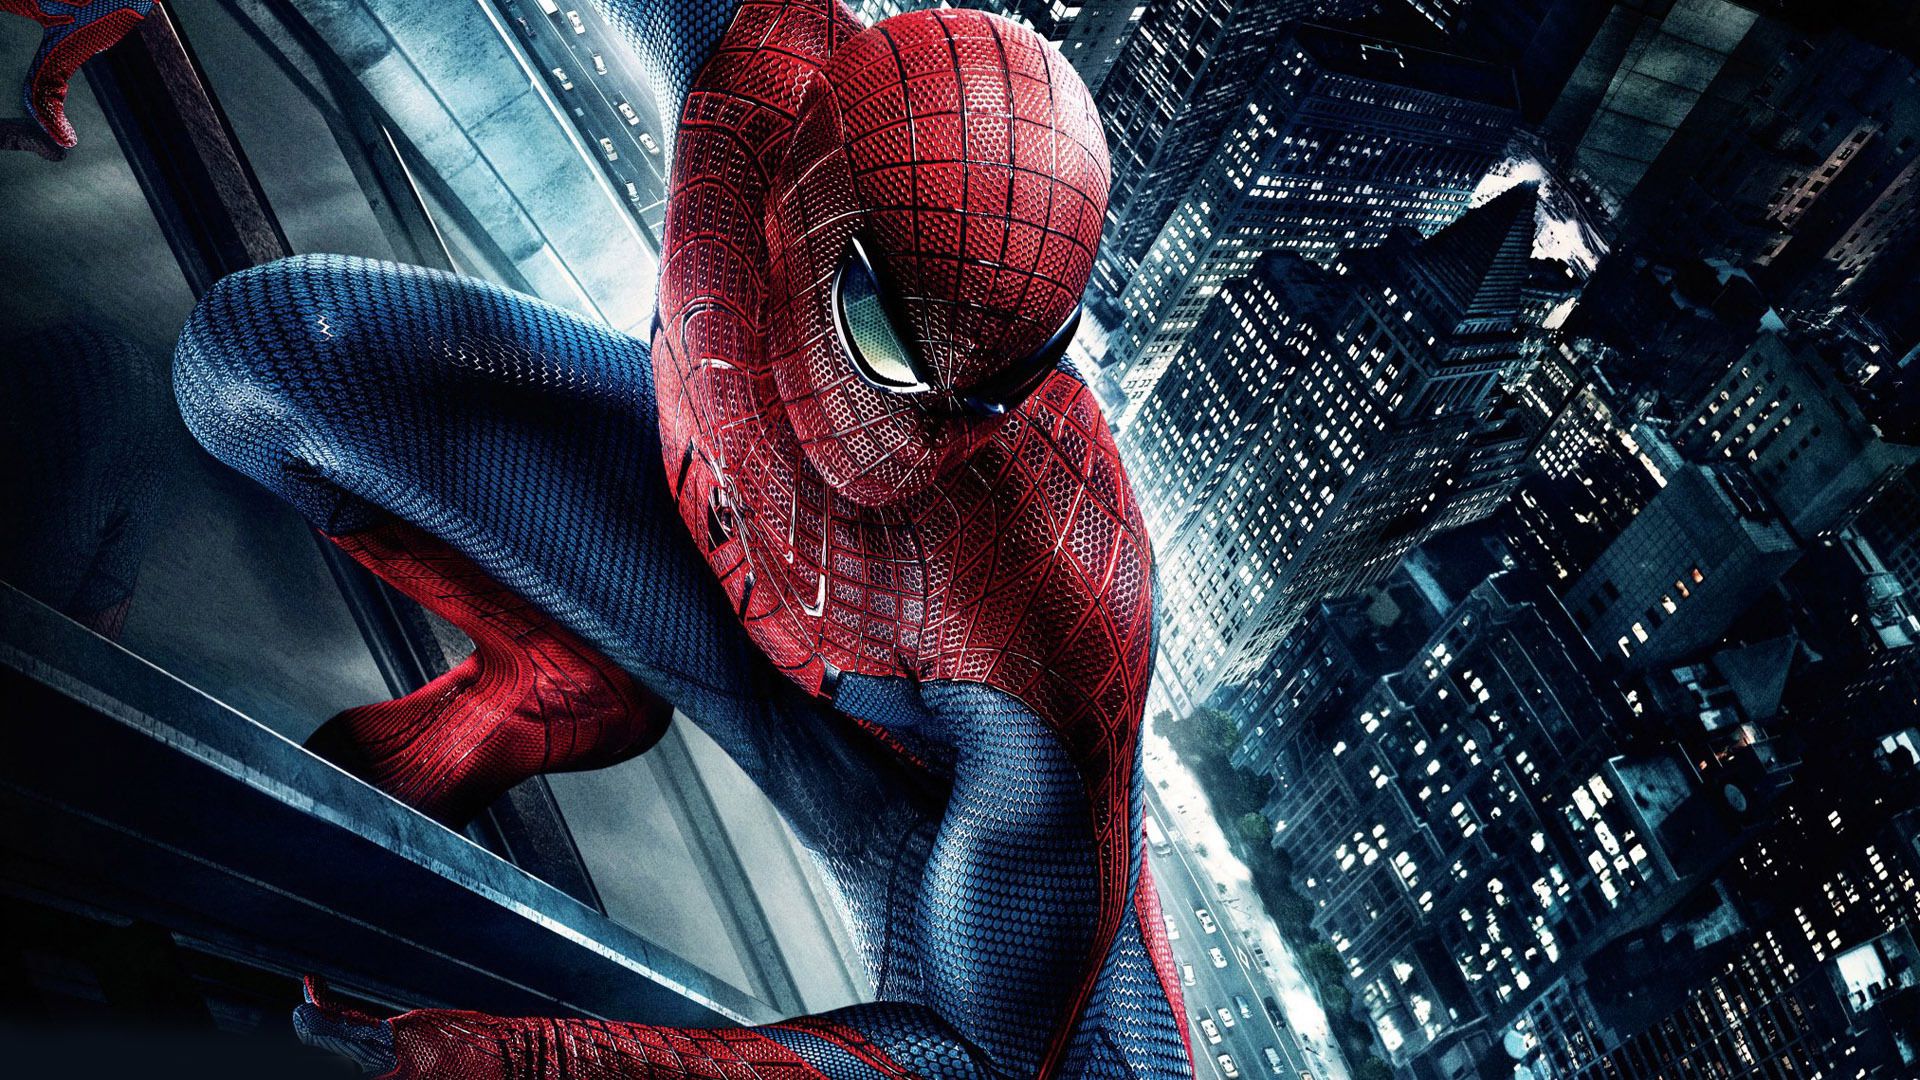 The Amazing Spider Man wallpaper - Free Wide HD Wallpaper